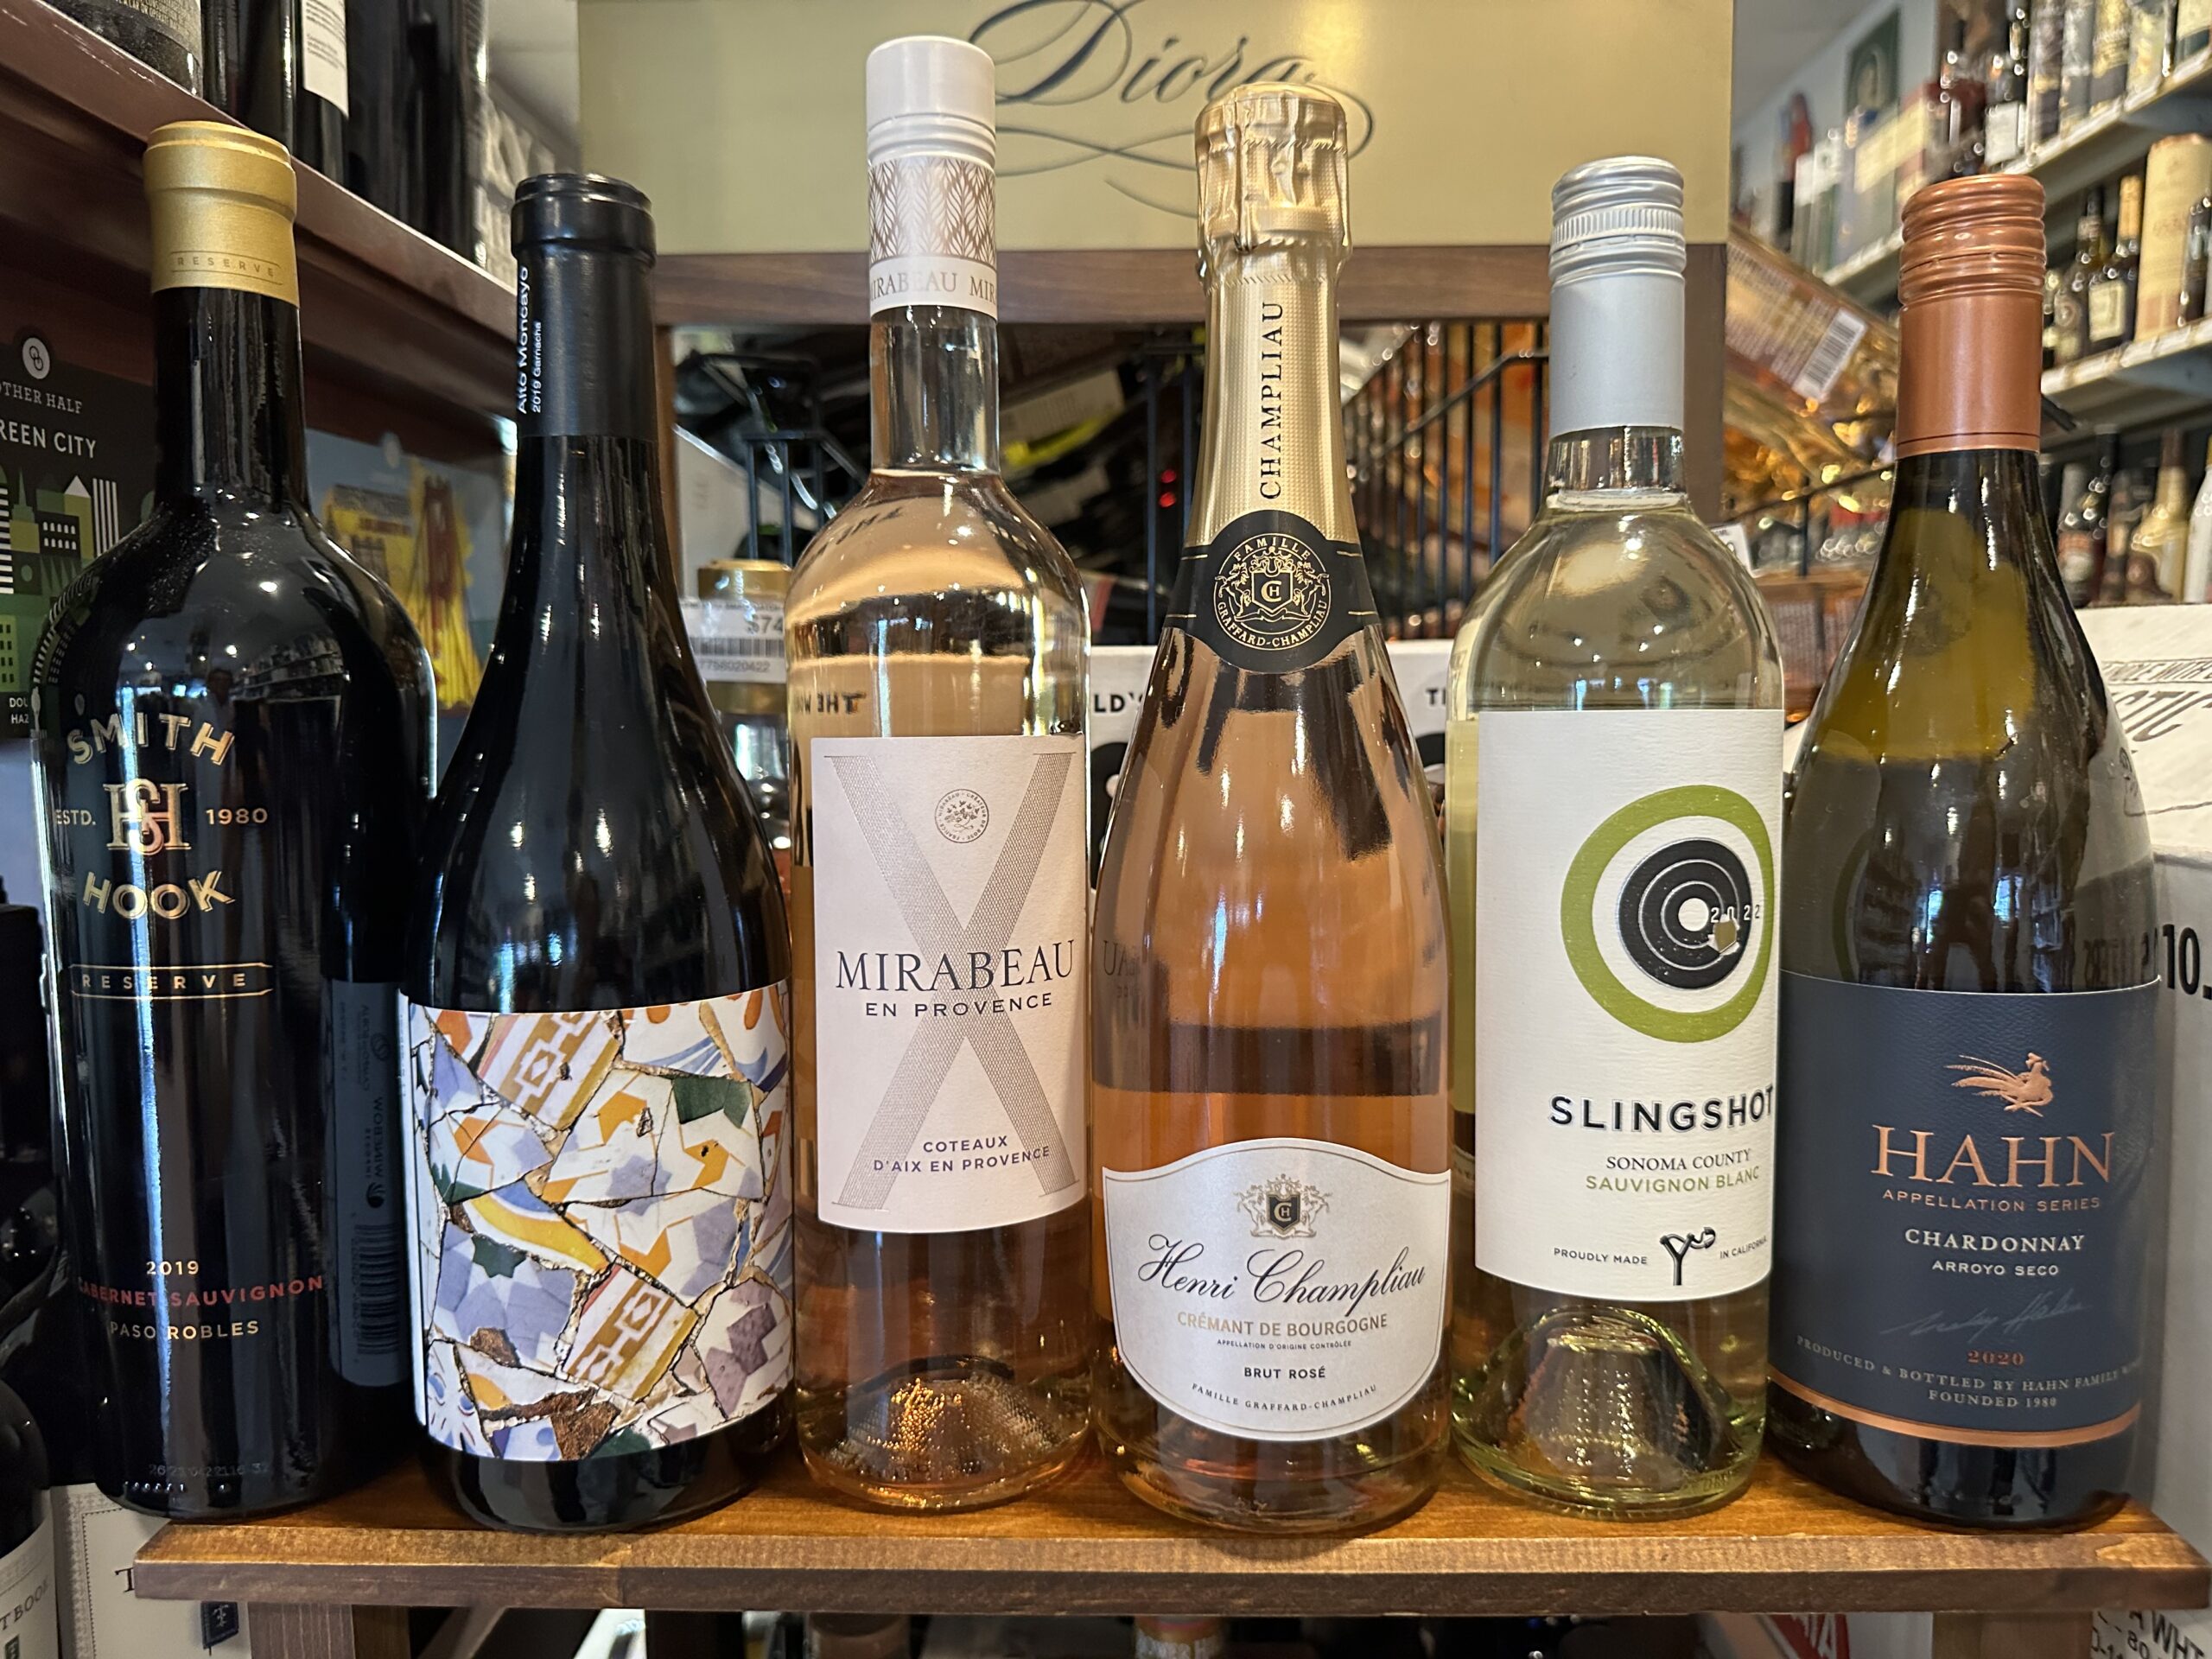 Wines and more tasting this Saturday June 17th 1 pm to 3 pm